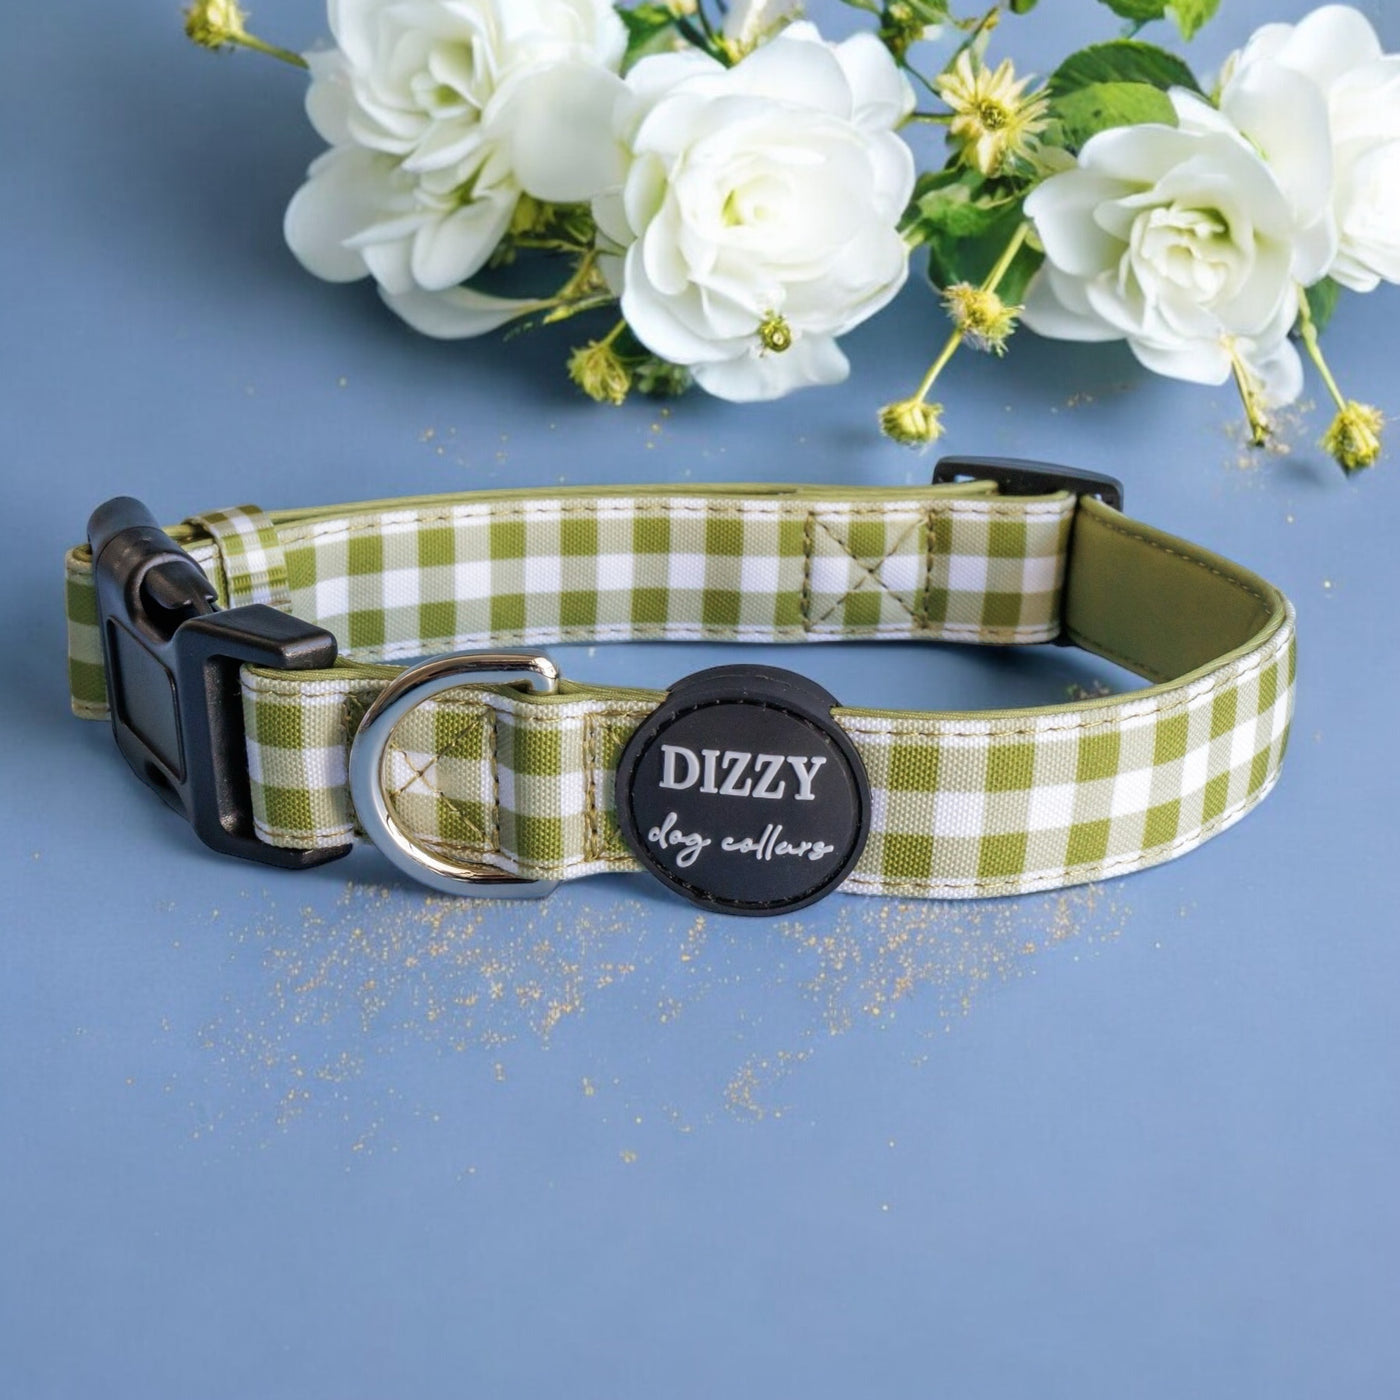 The image features a green and white checkered dog collar on a navy blue background, accented by white roses and gold glitter. The collar is labeled "Dizzy Dog Collars," and the overall composition highlights the collar with an elegant floral touch.